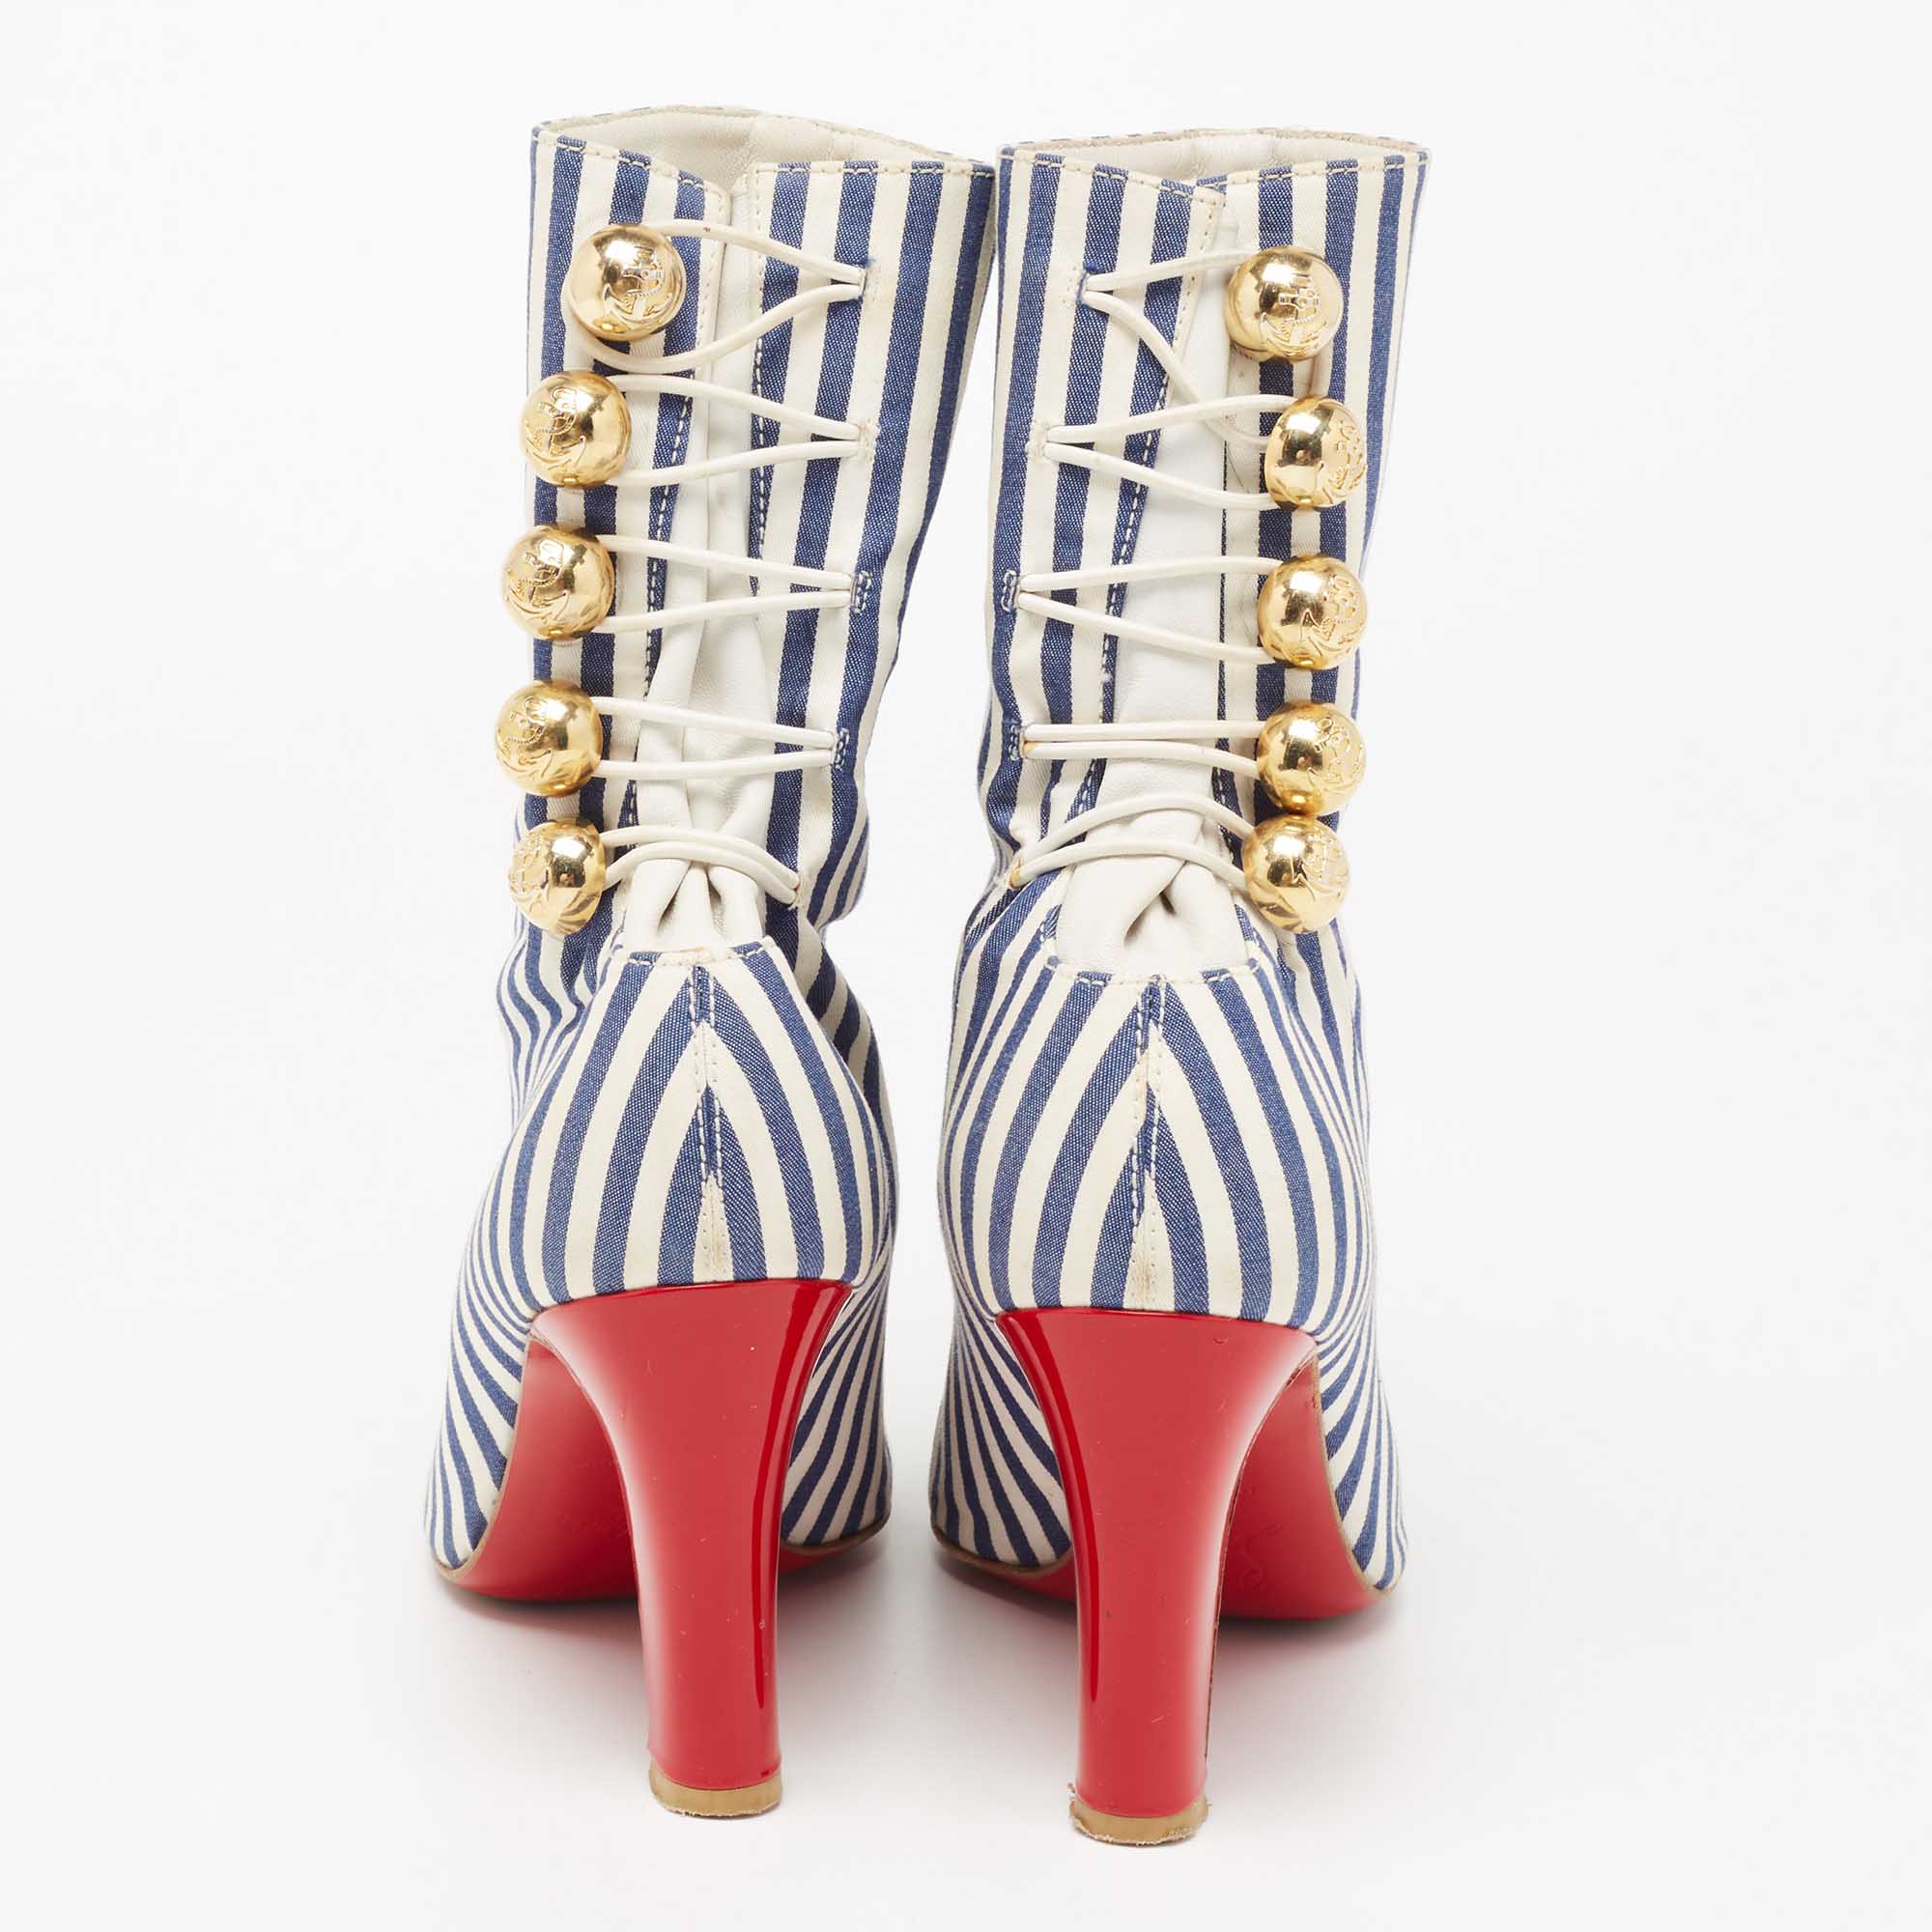 Christian Louboutin Blue/White Stripe Fabric And Leather Peep-Toe Ankle Boots Size 36